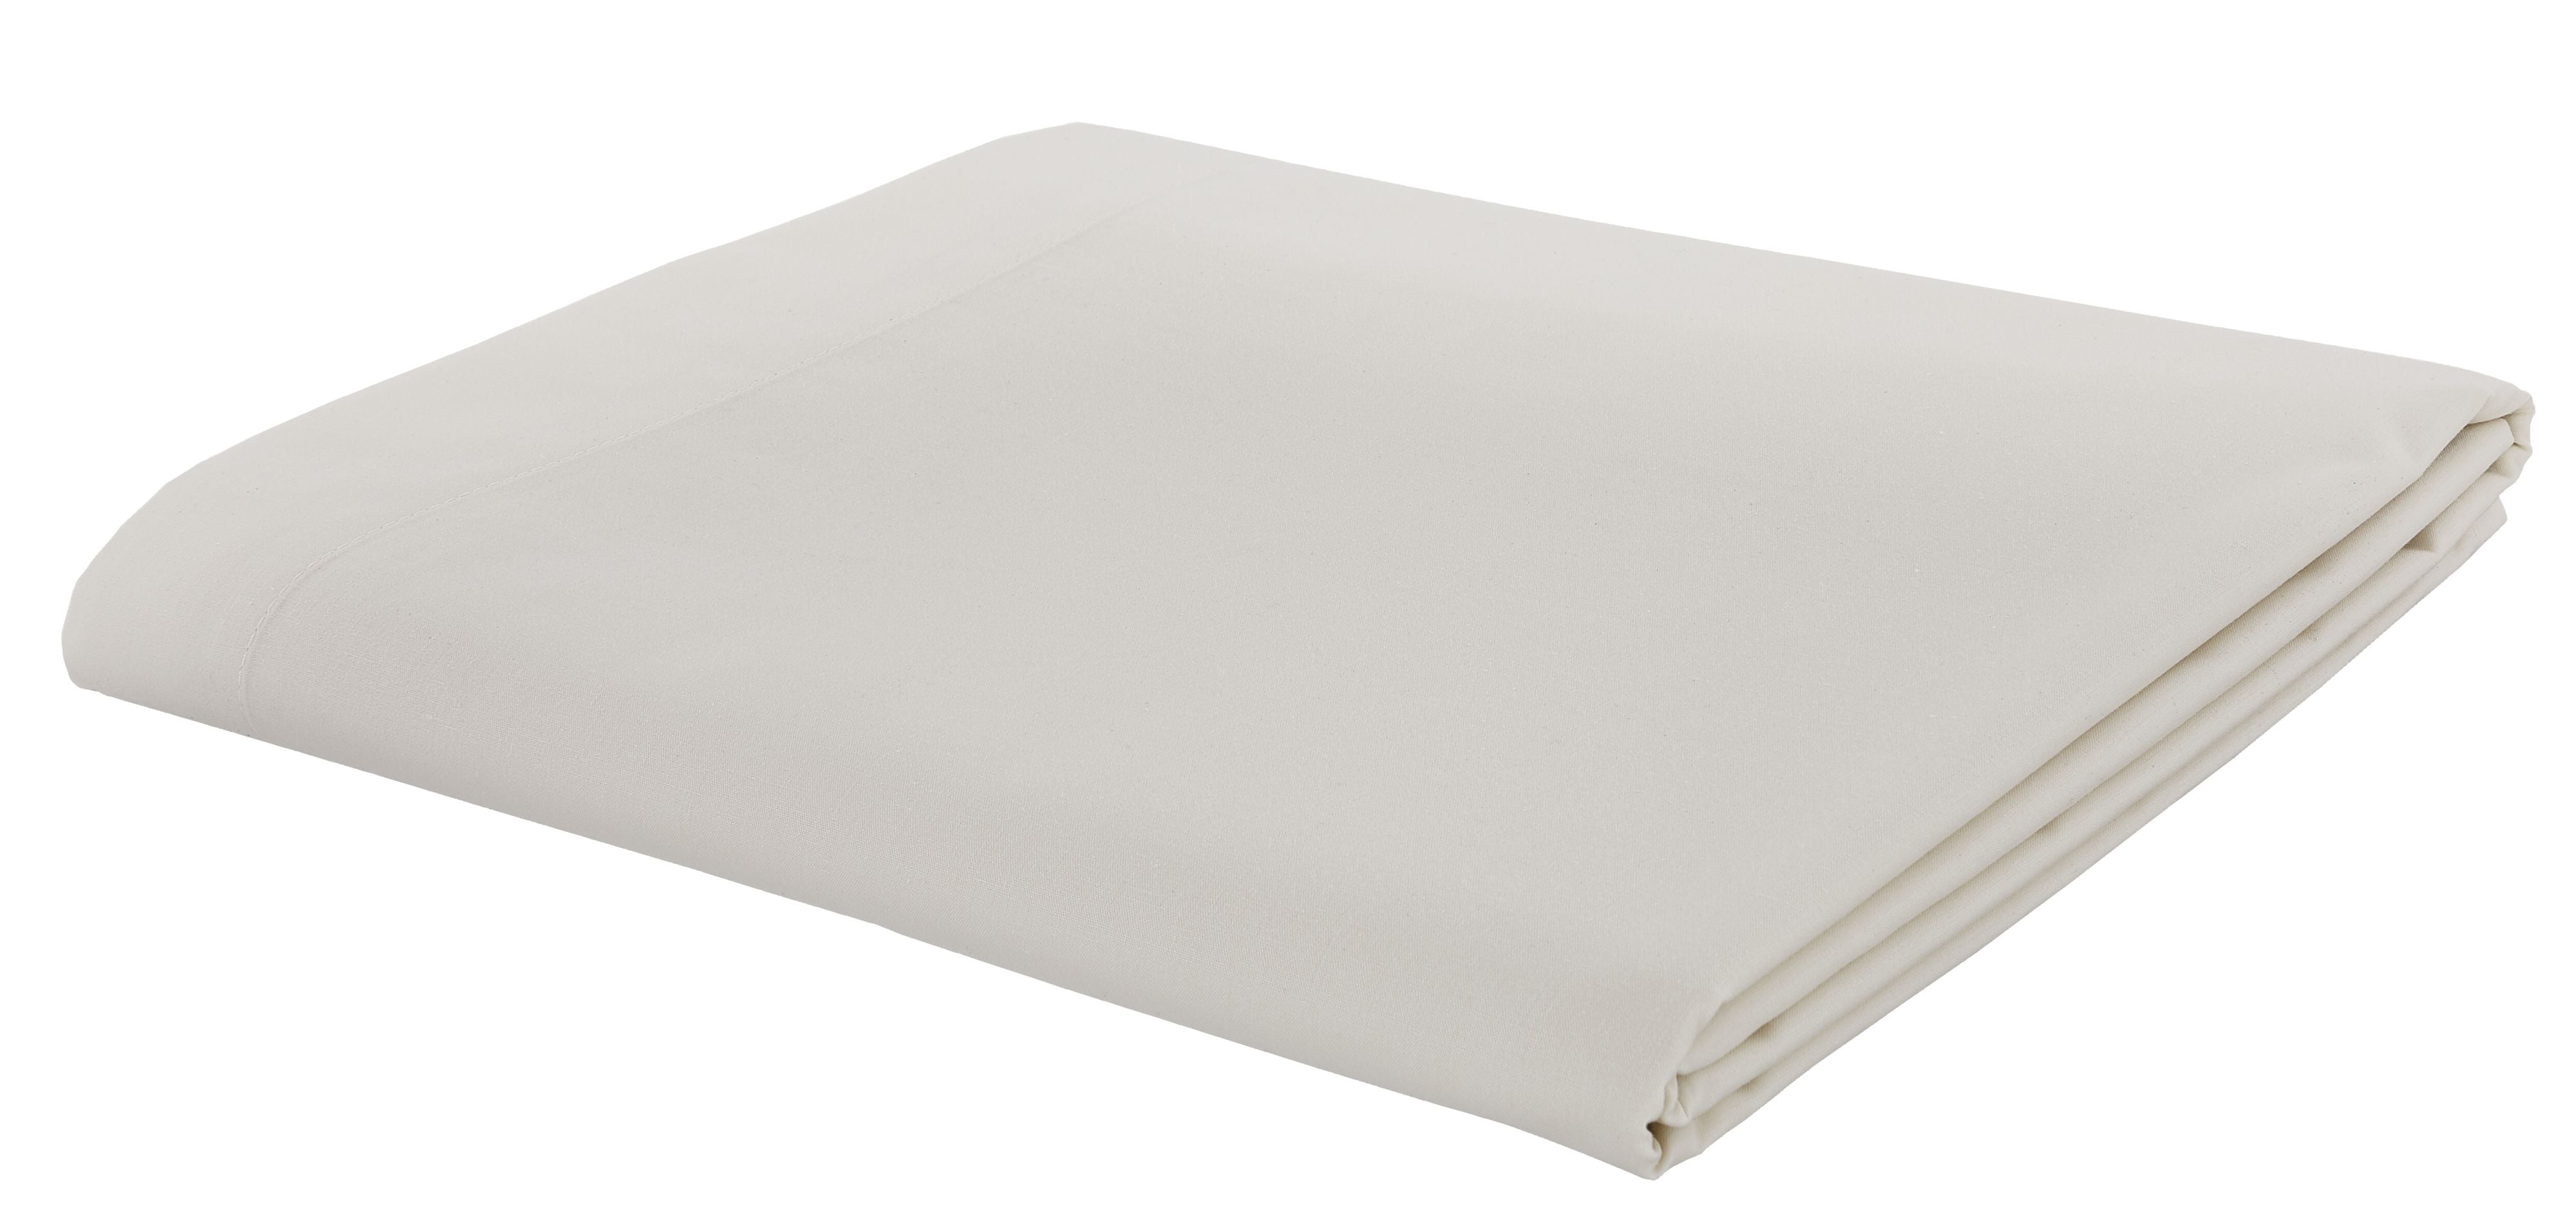 Catherine Lansfield Combed Percale Non-Iron Sheeting, Cream